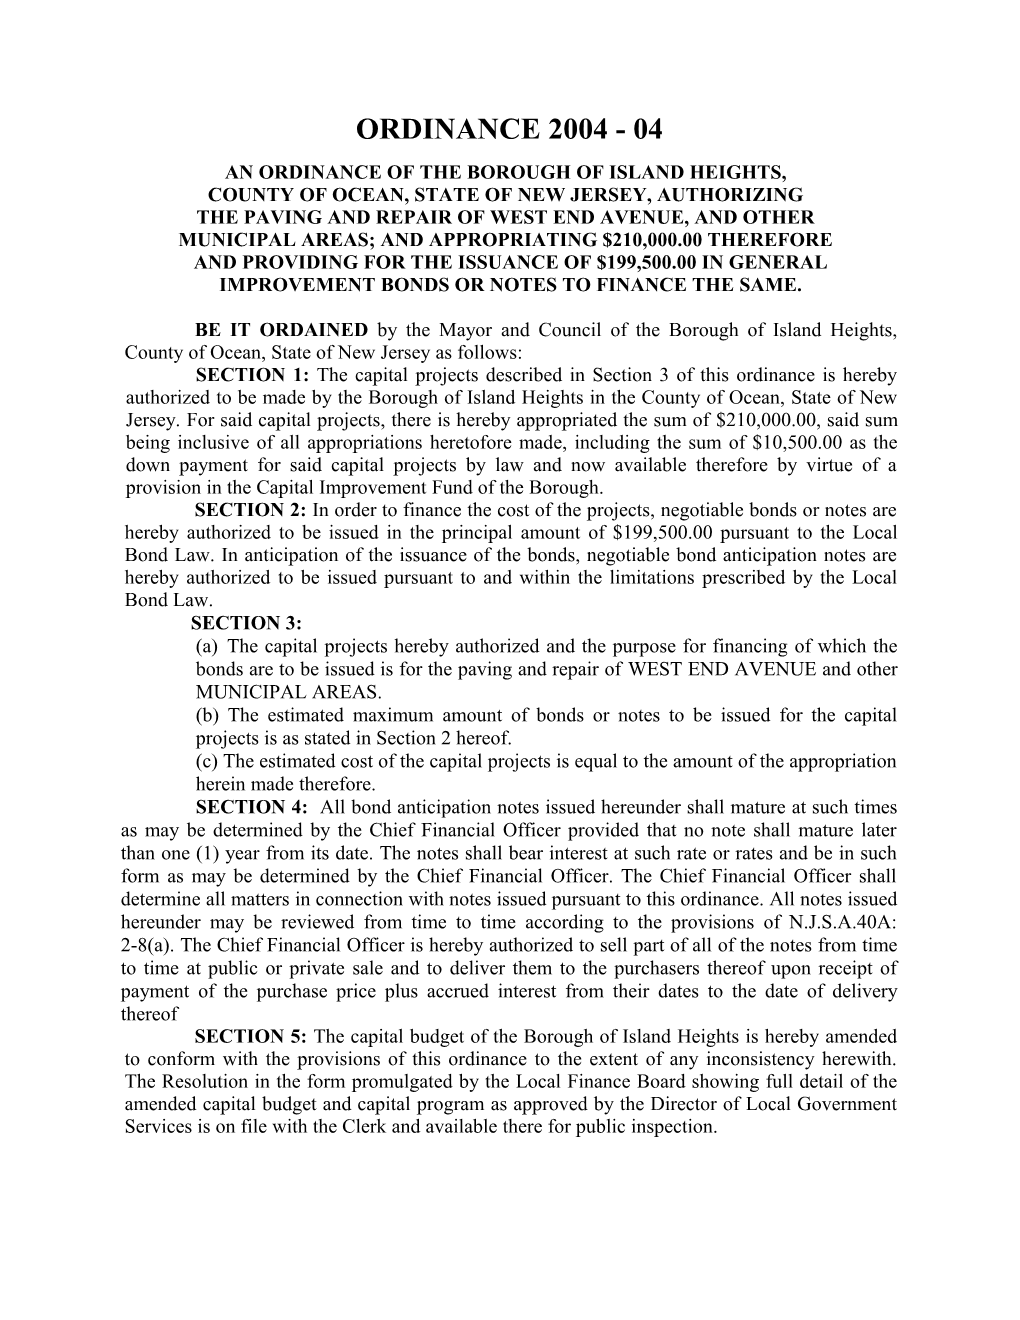 An Ordinance of the Borough of Island Heights s1